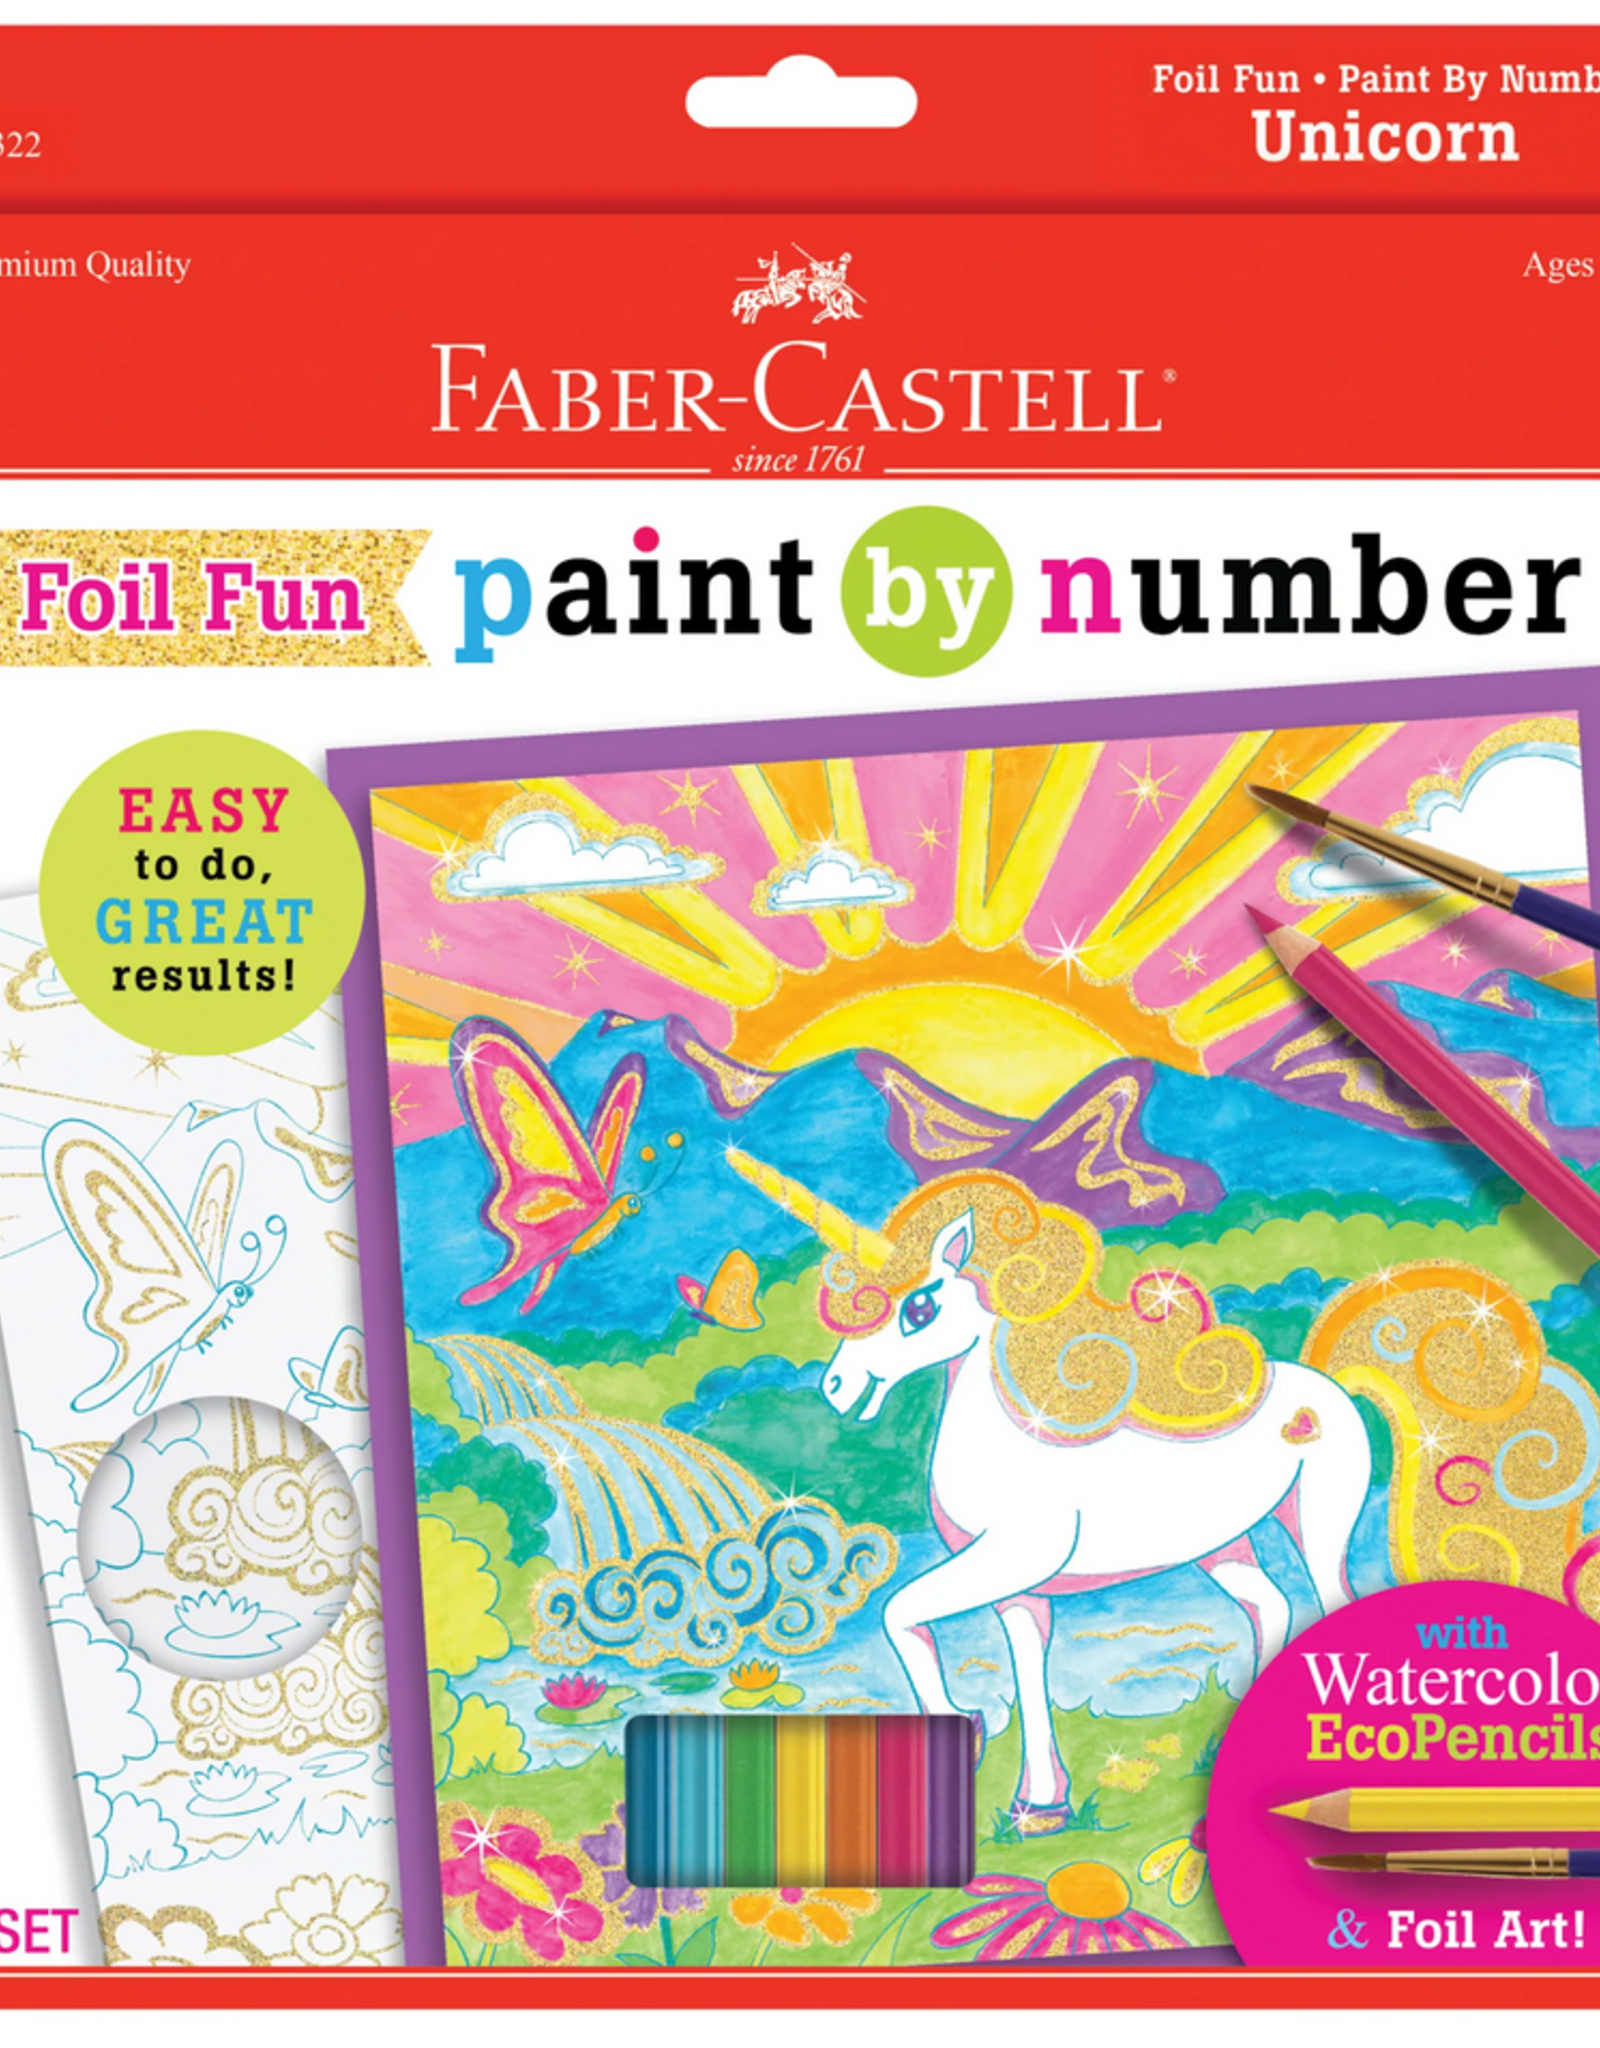 Faber-Castell Paint By Number: Unicorn Foil Fun